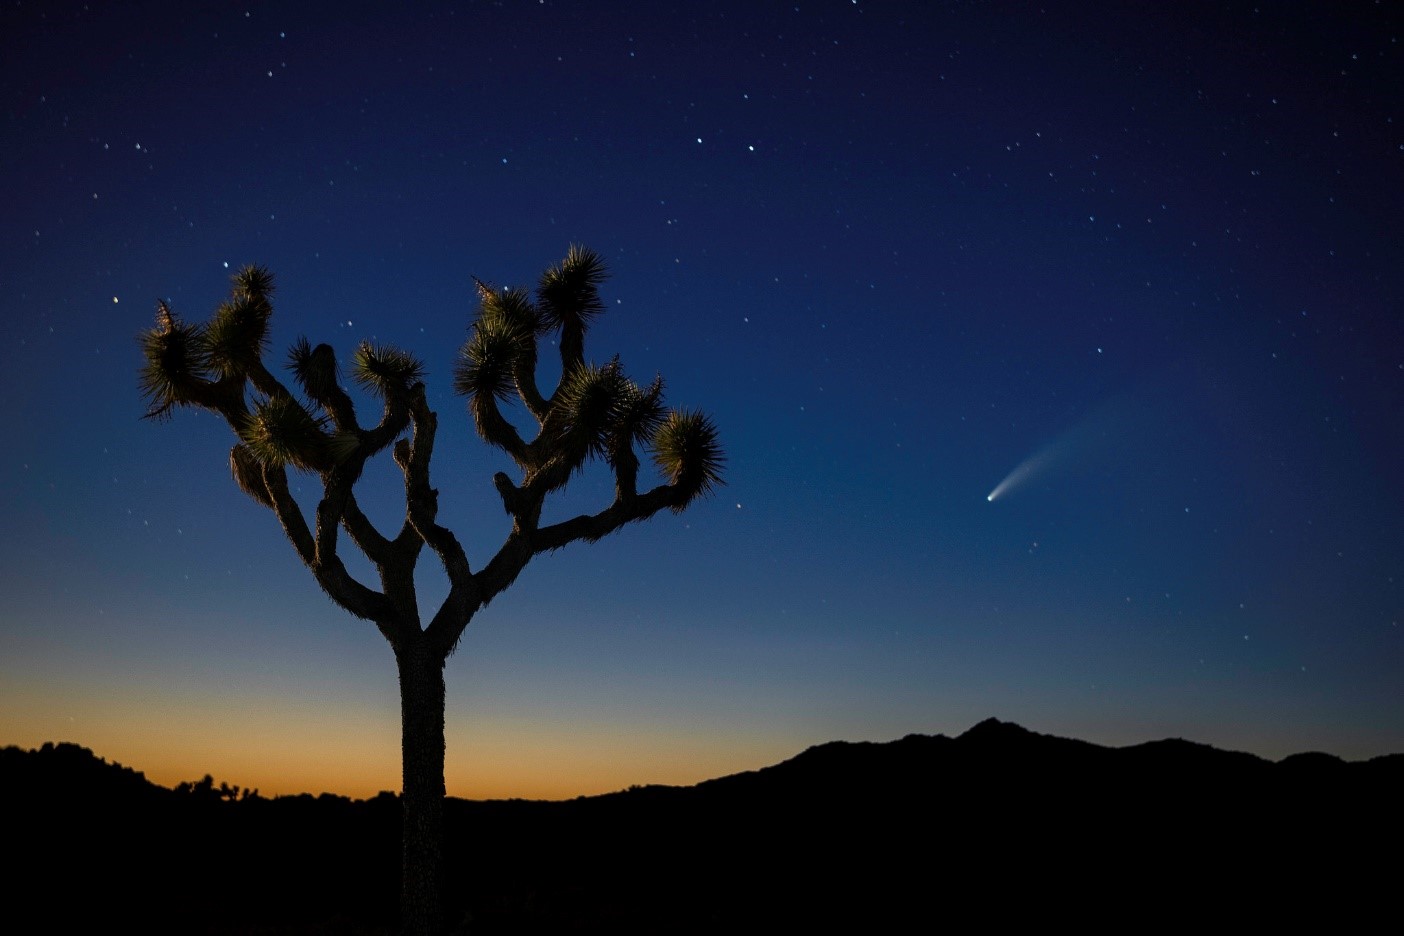 A Joshua tree stands alone in the twilight, against silhouetted mountains in the distance at Joshua Tree National Park. Photo by National Park Service.